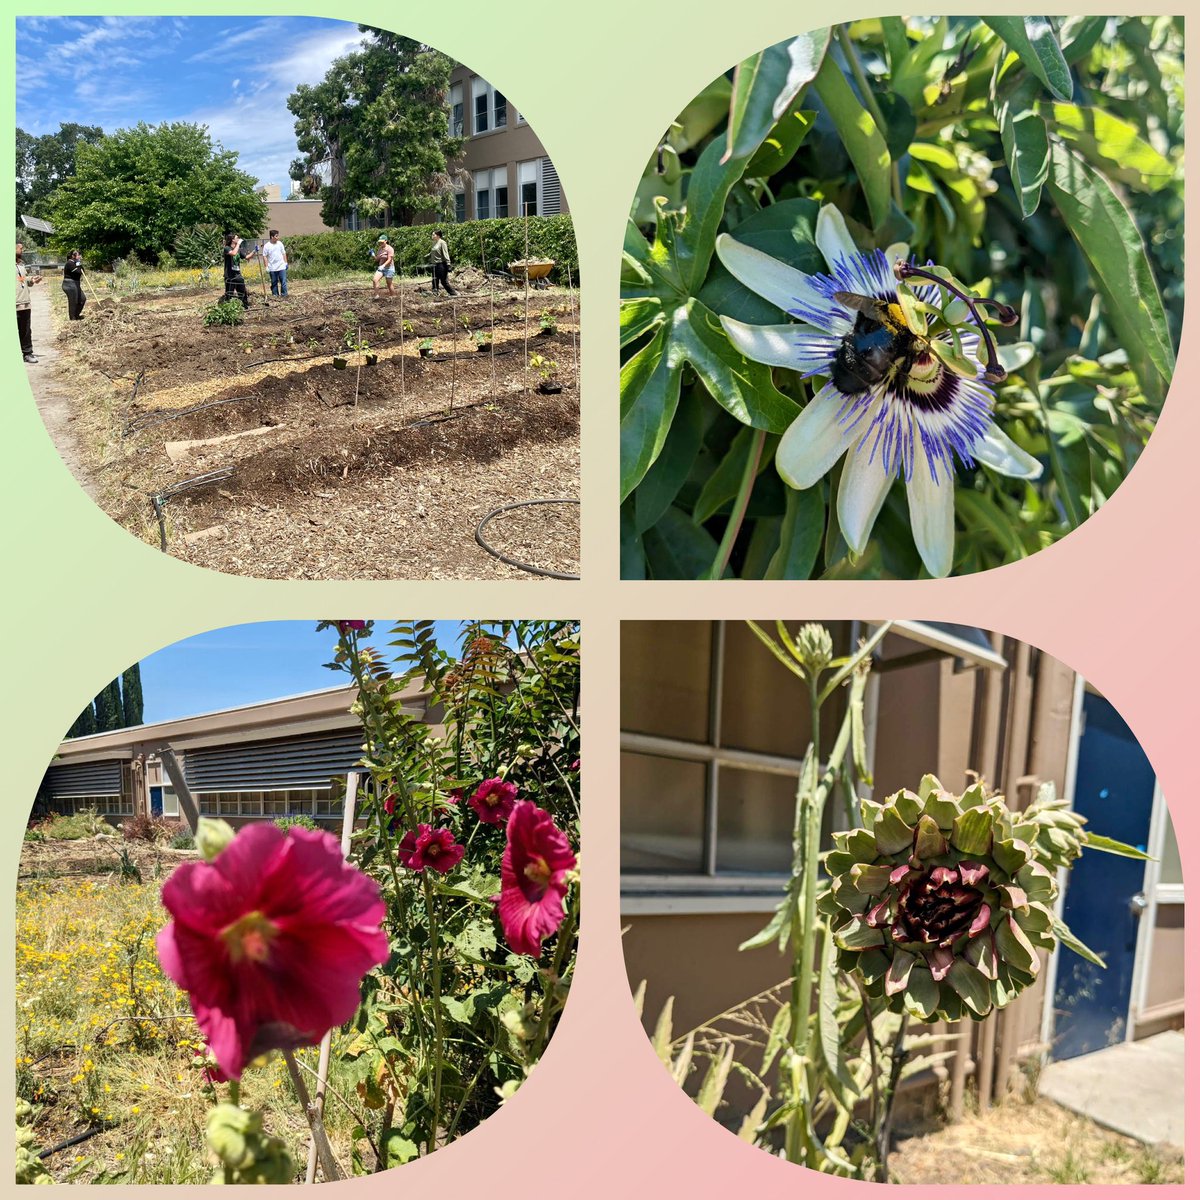 🪻Happy Flower Friday from our lovely garden! Our students in @CARES_ELP are creating such a beautiful space this summer 🧑🏽‍🌾 #blooming